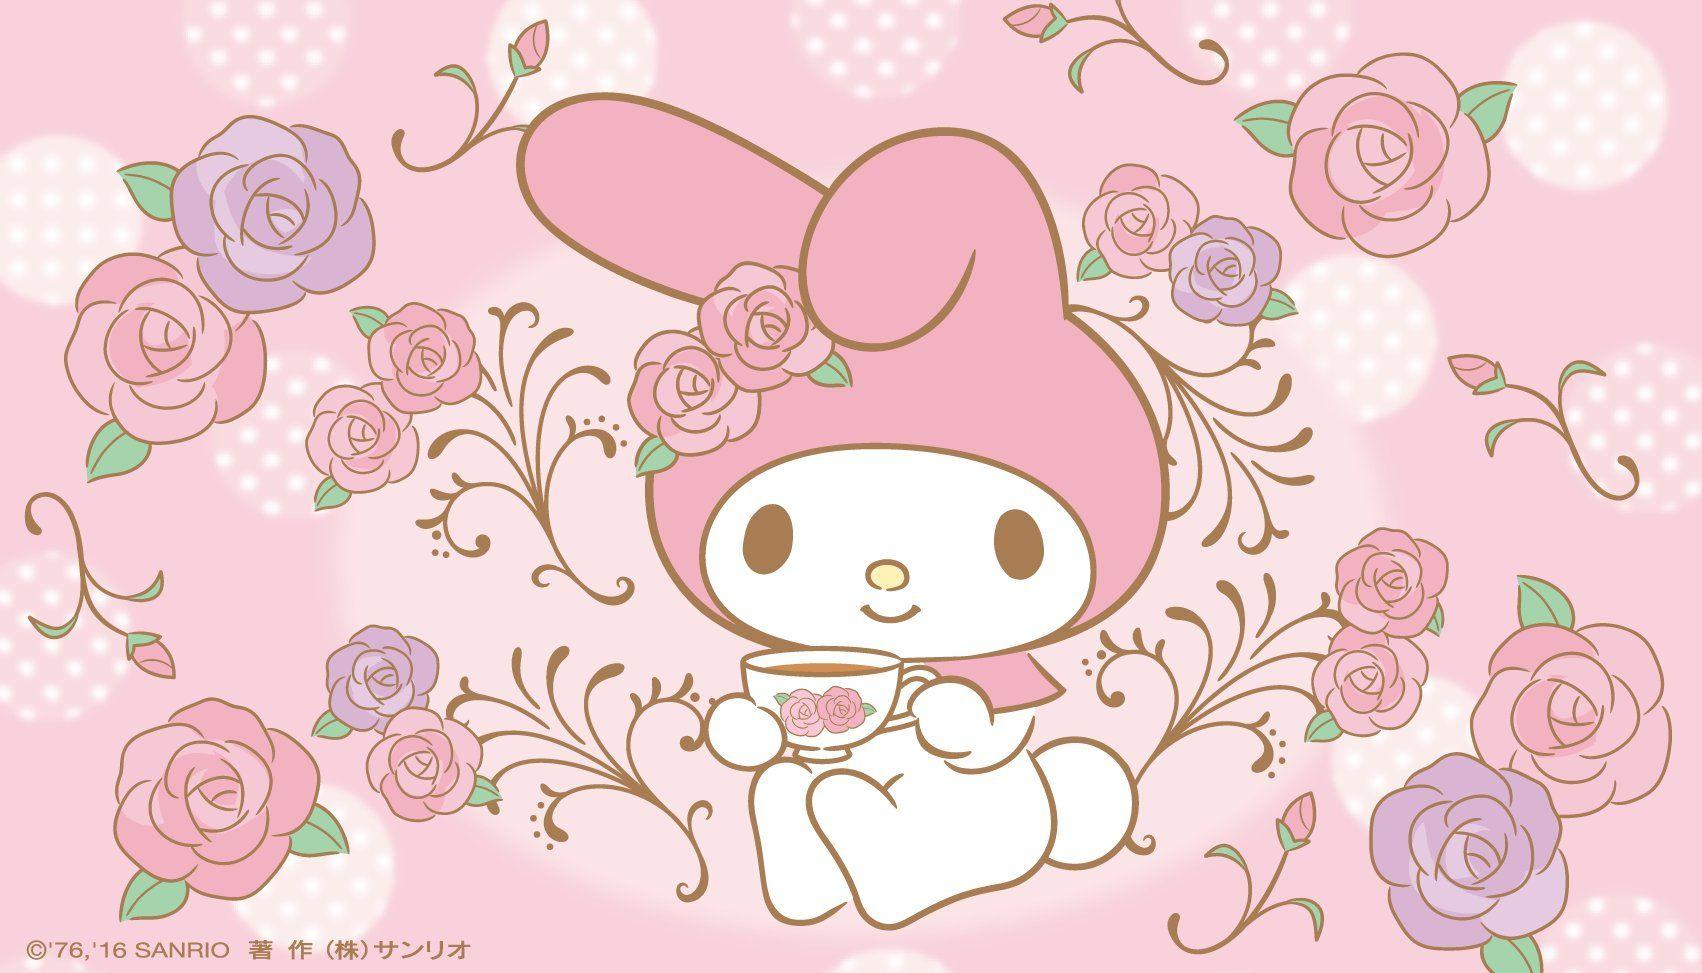 Download Onegai My Melody wallpapers for mobile phone free Onegai My  Melody HD pictures